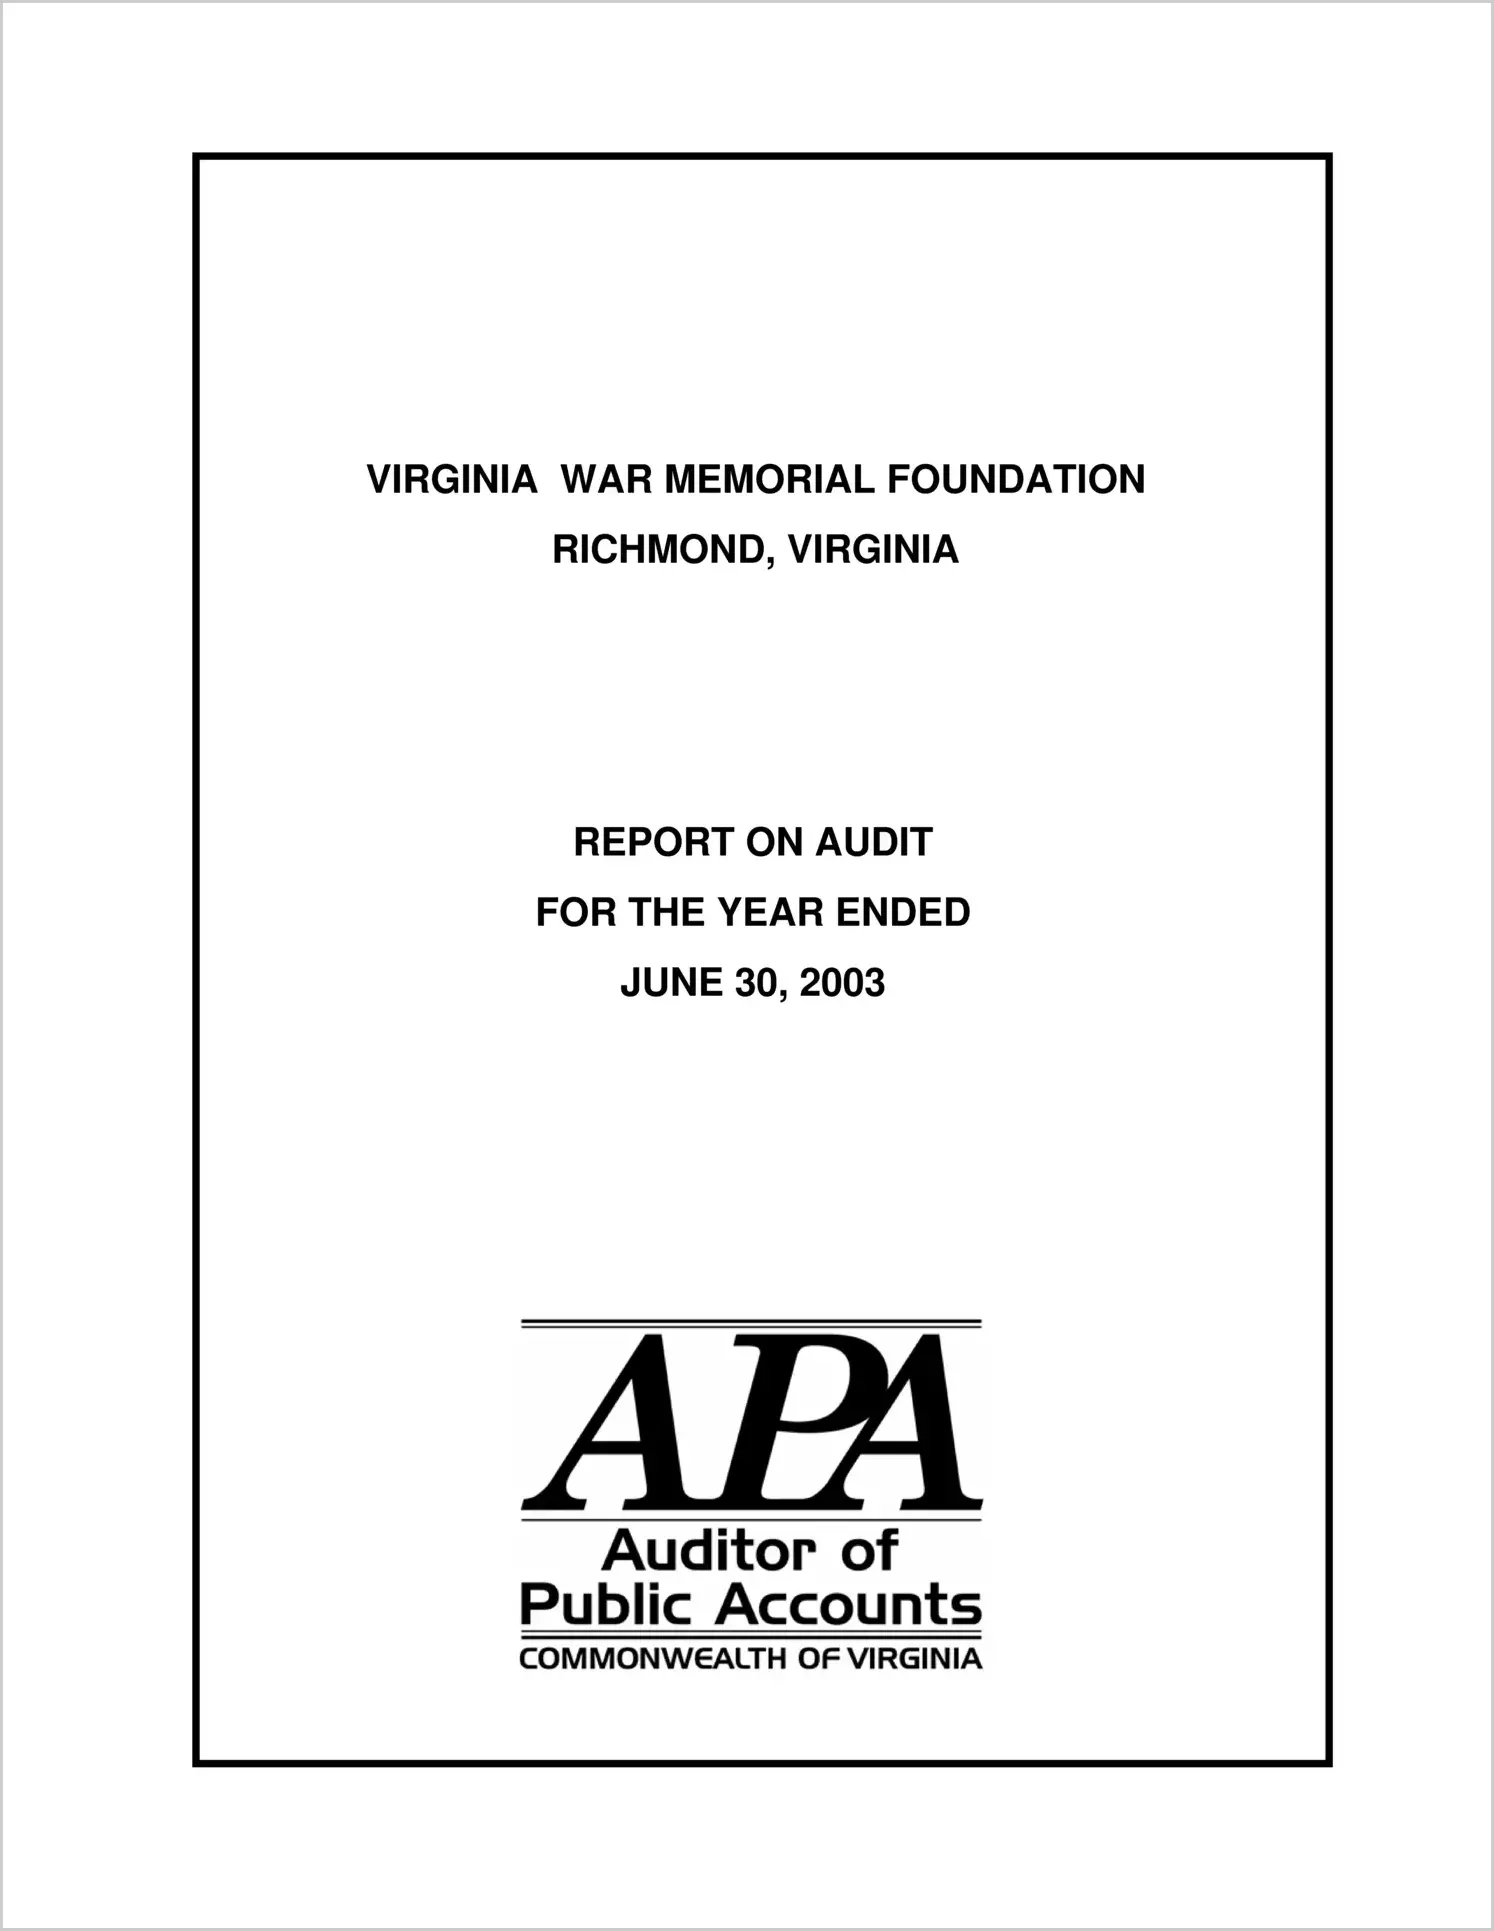 Virginia War Memorial Foundation for the year ended June 30, 2003